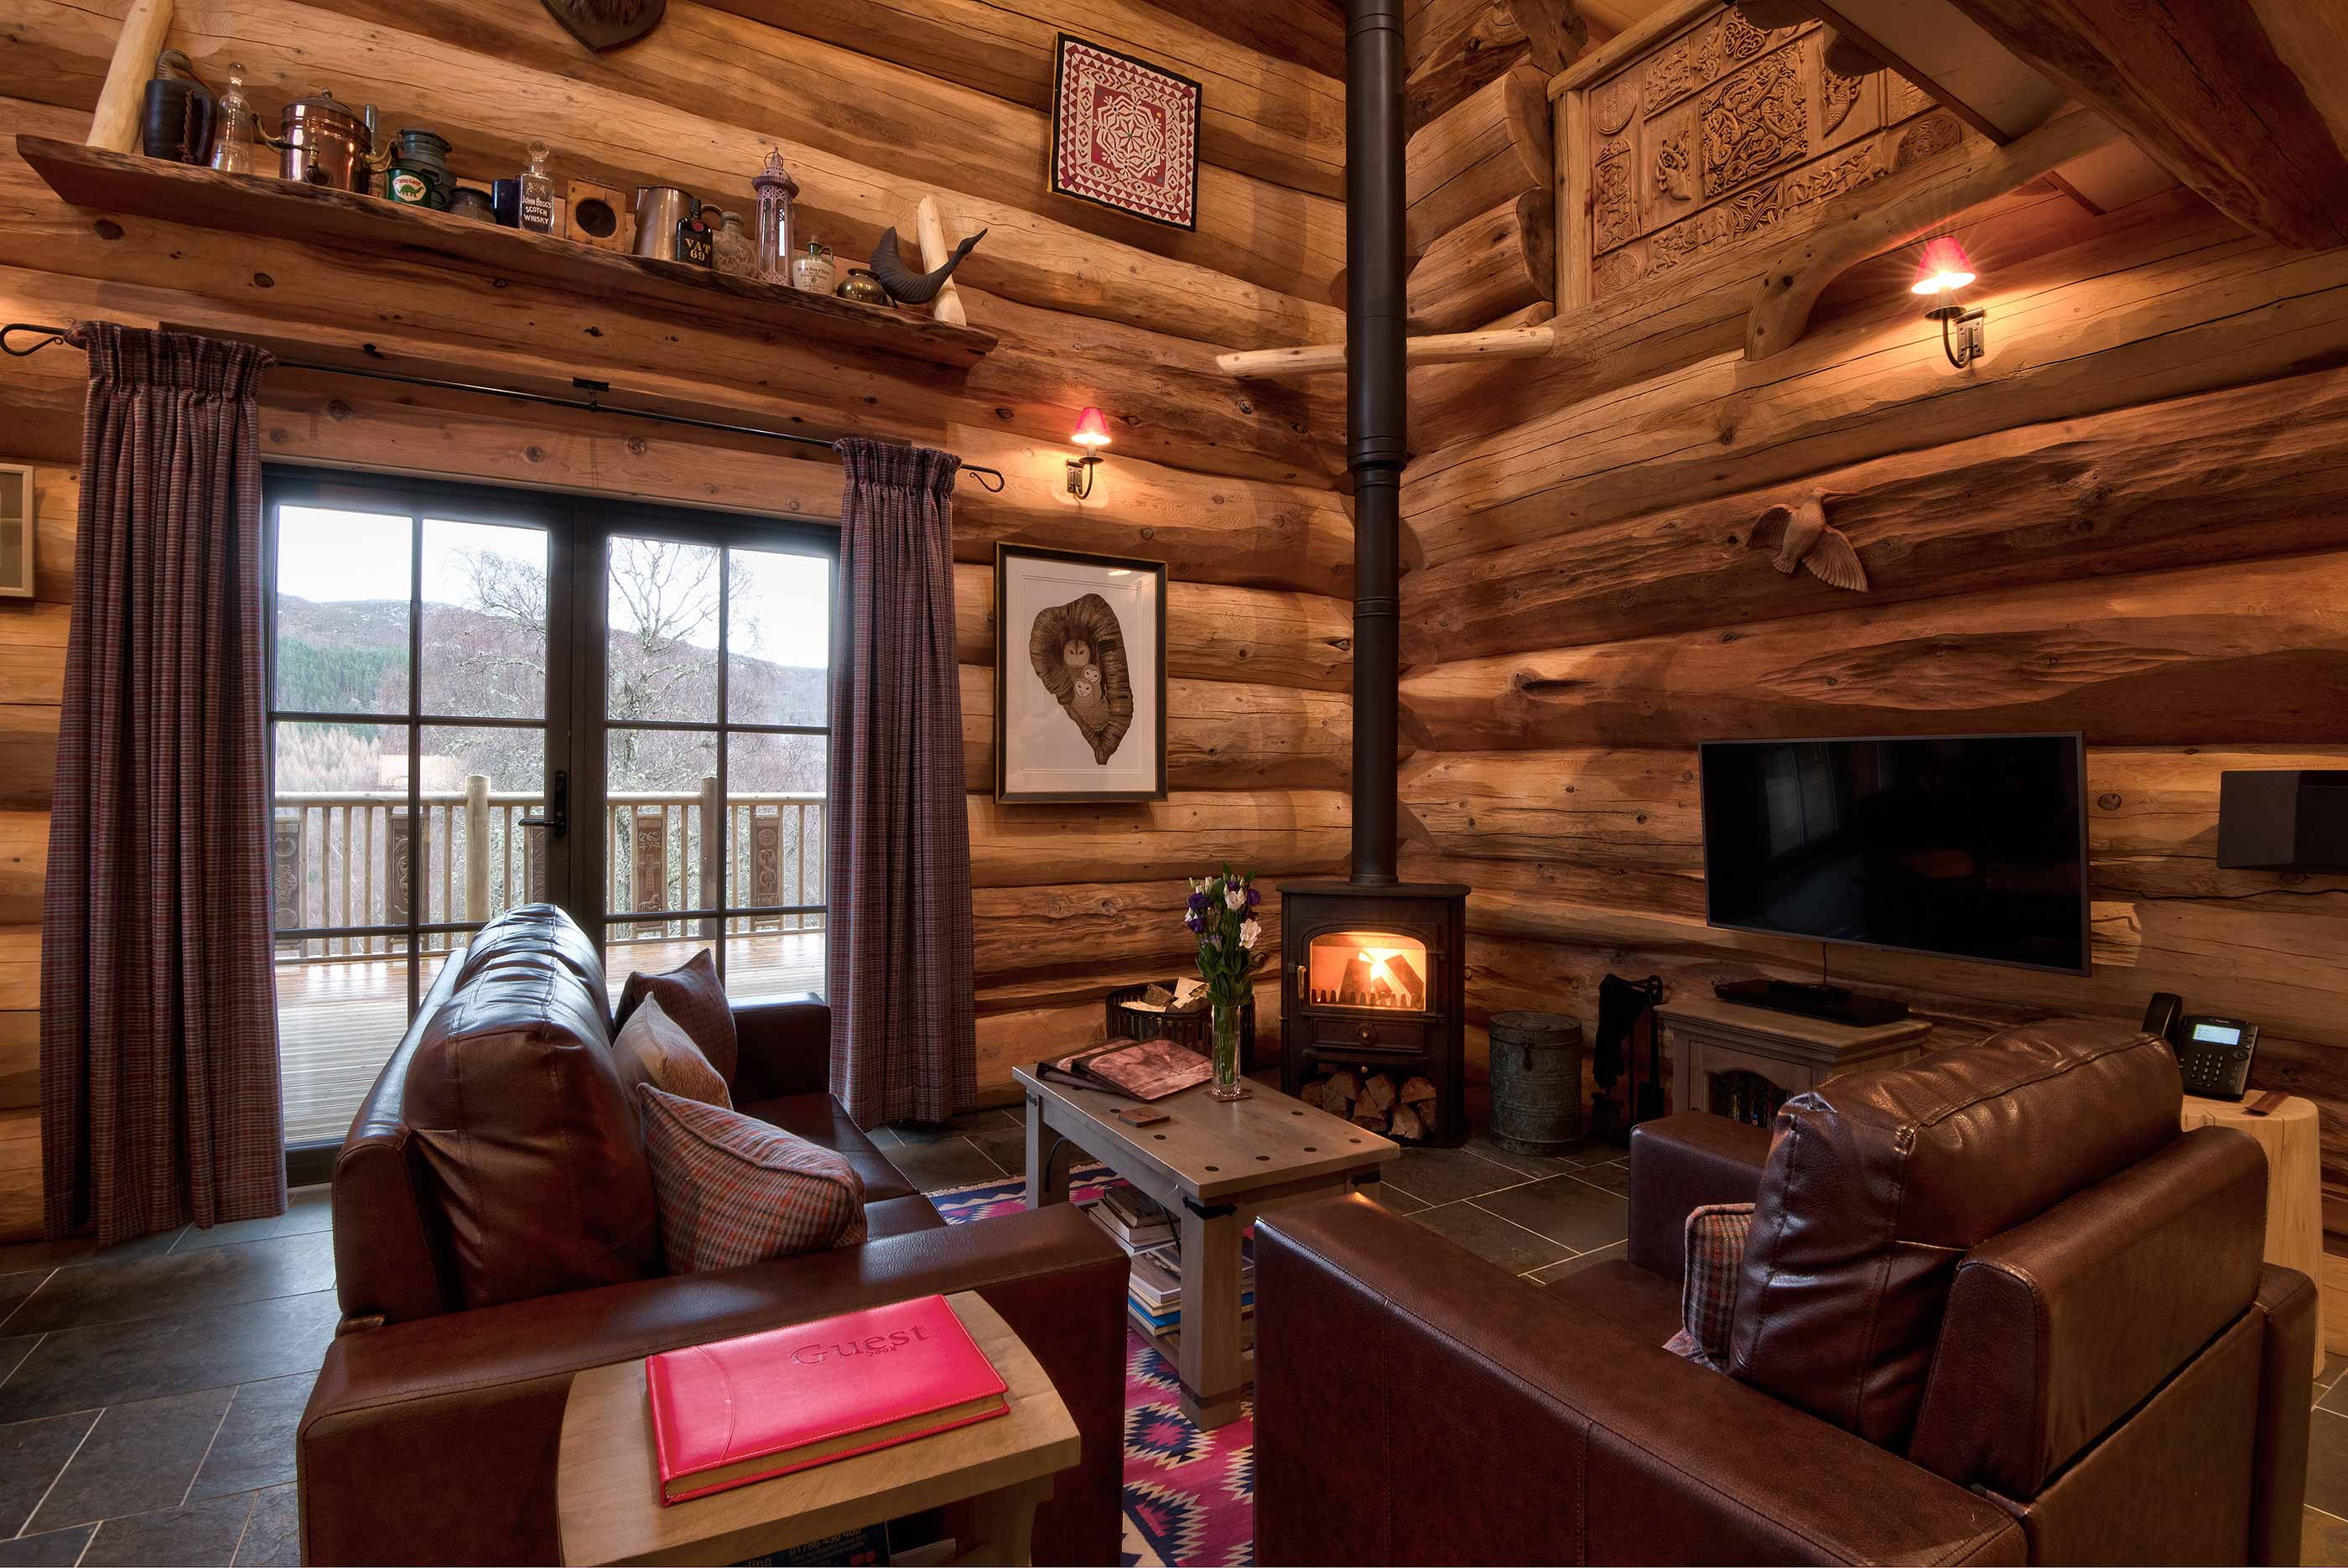 Log cabin interior in winter with log fire